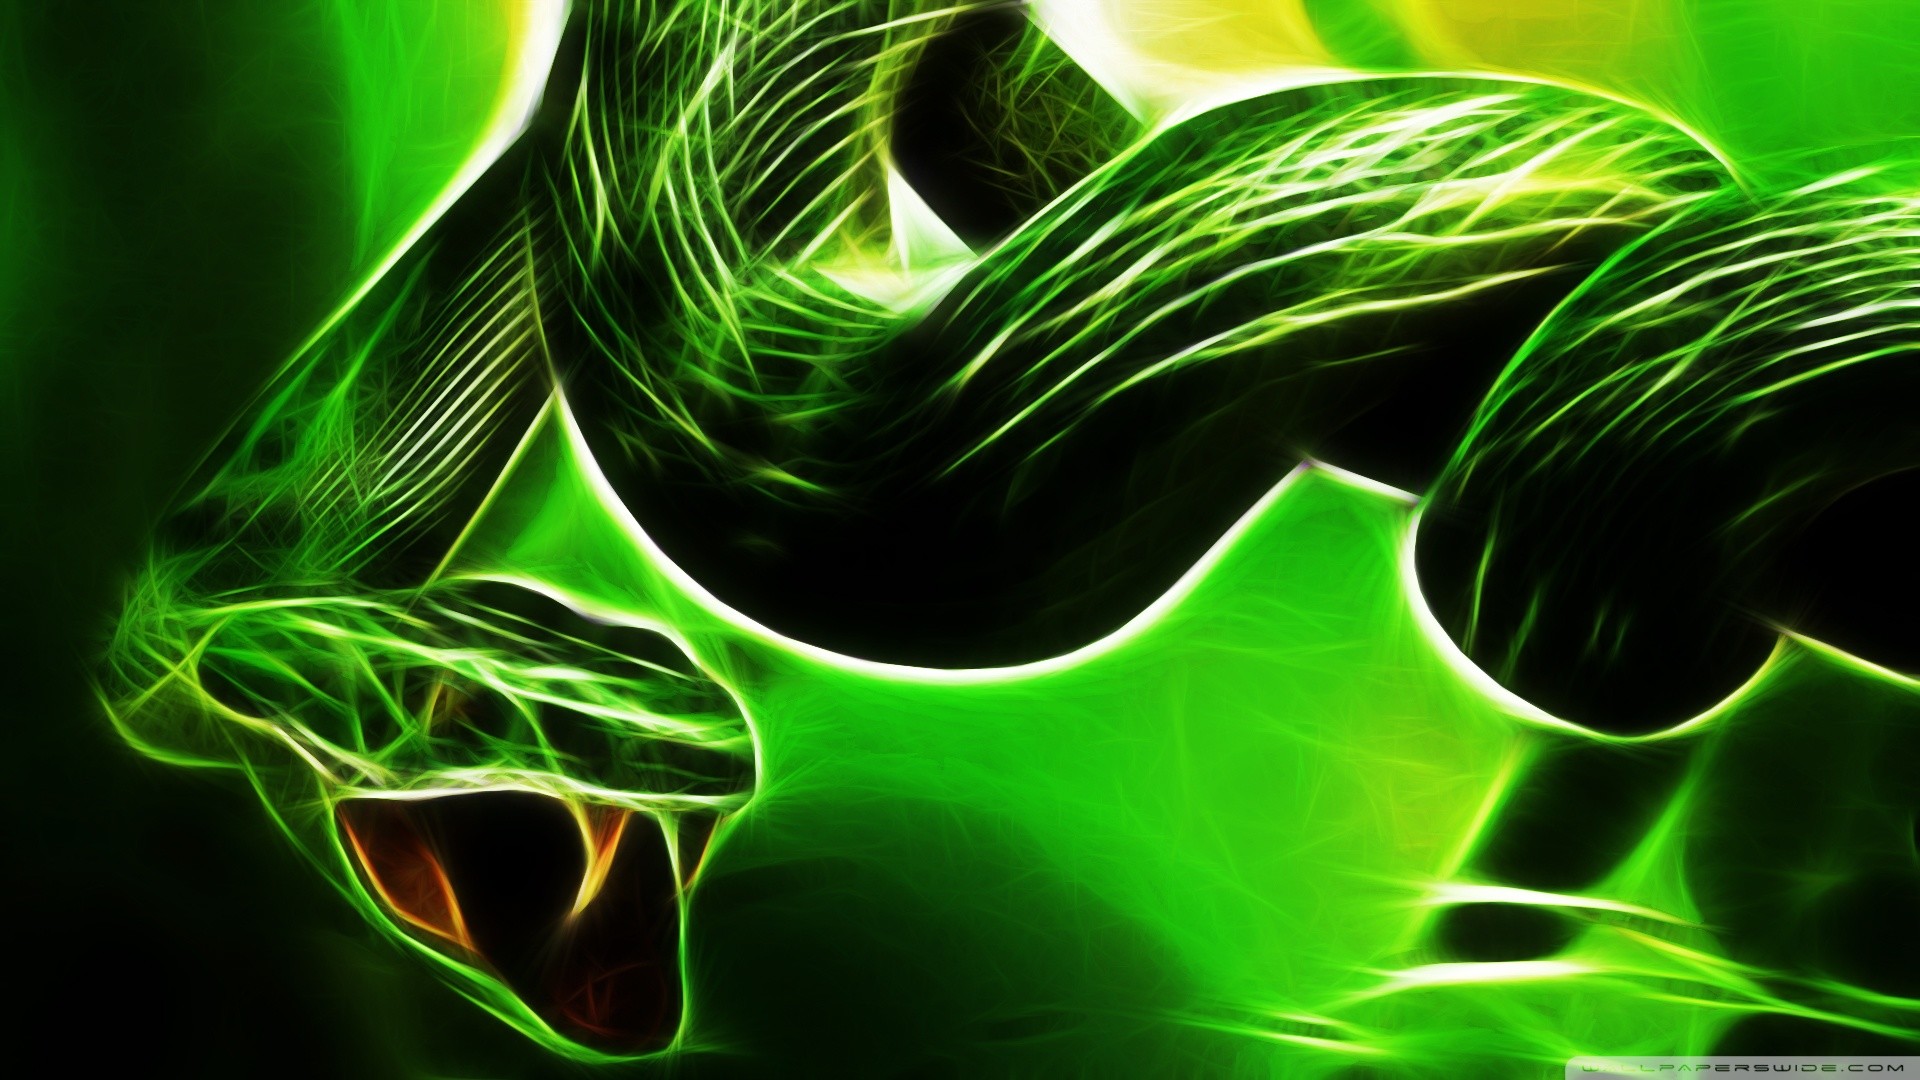 1920x1080 Snake Wallpaper Designs Amazing Wallpaperz Picture Wallpapers. small walk  in closet designs. how to ...